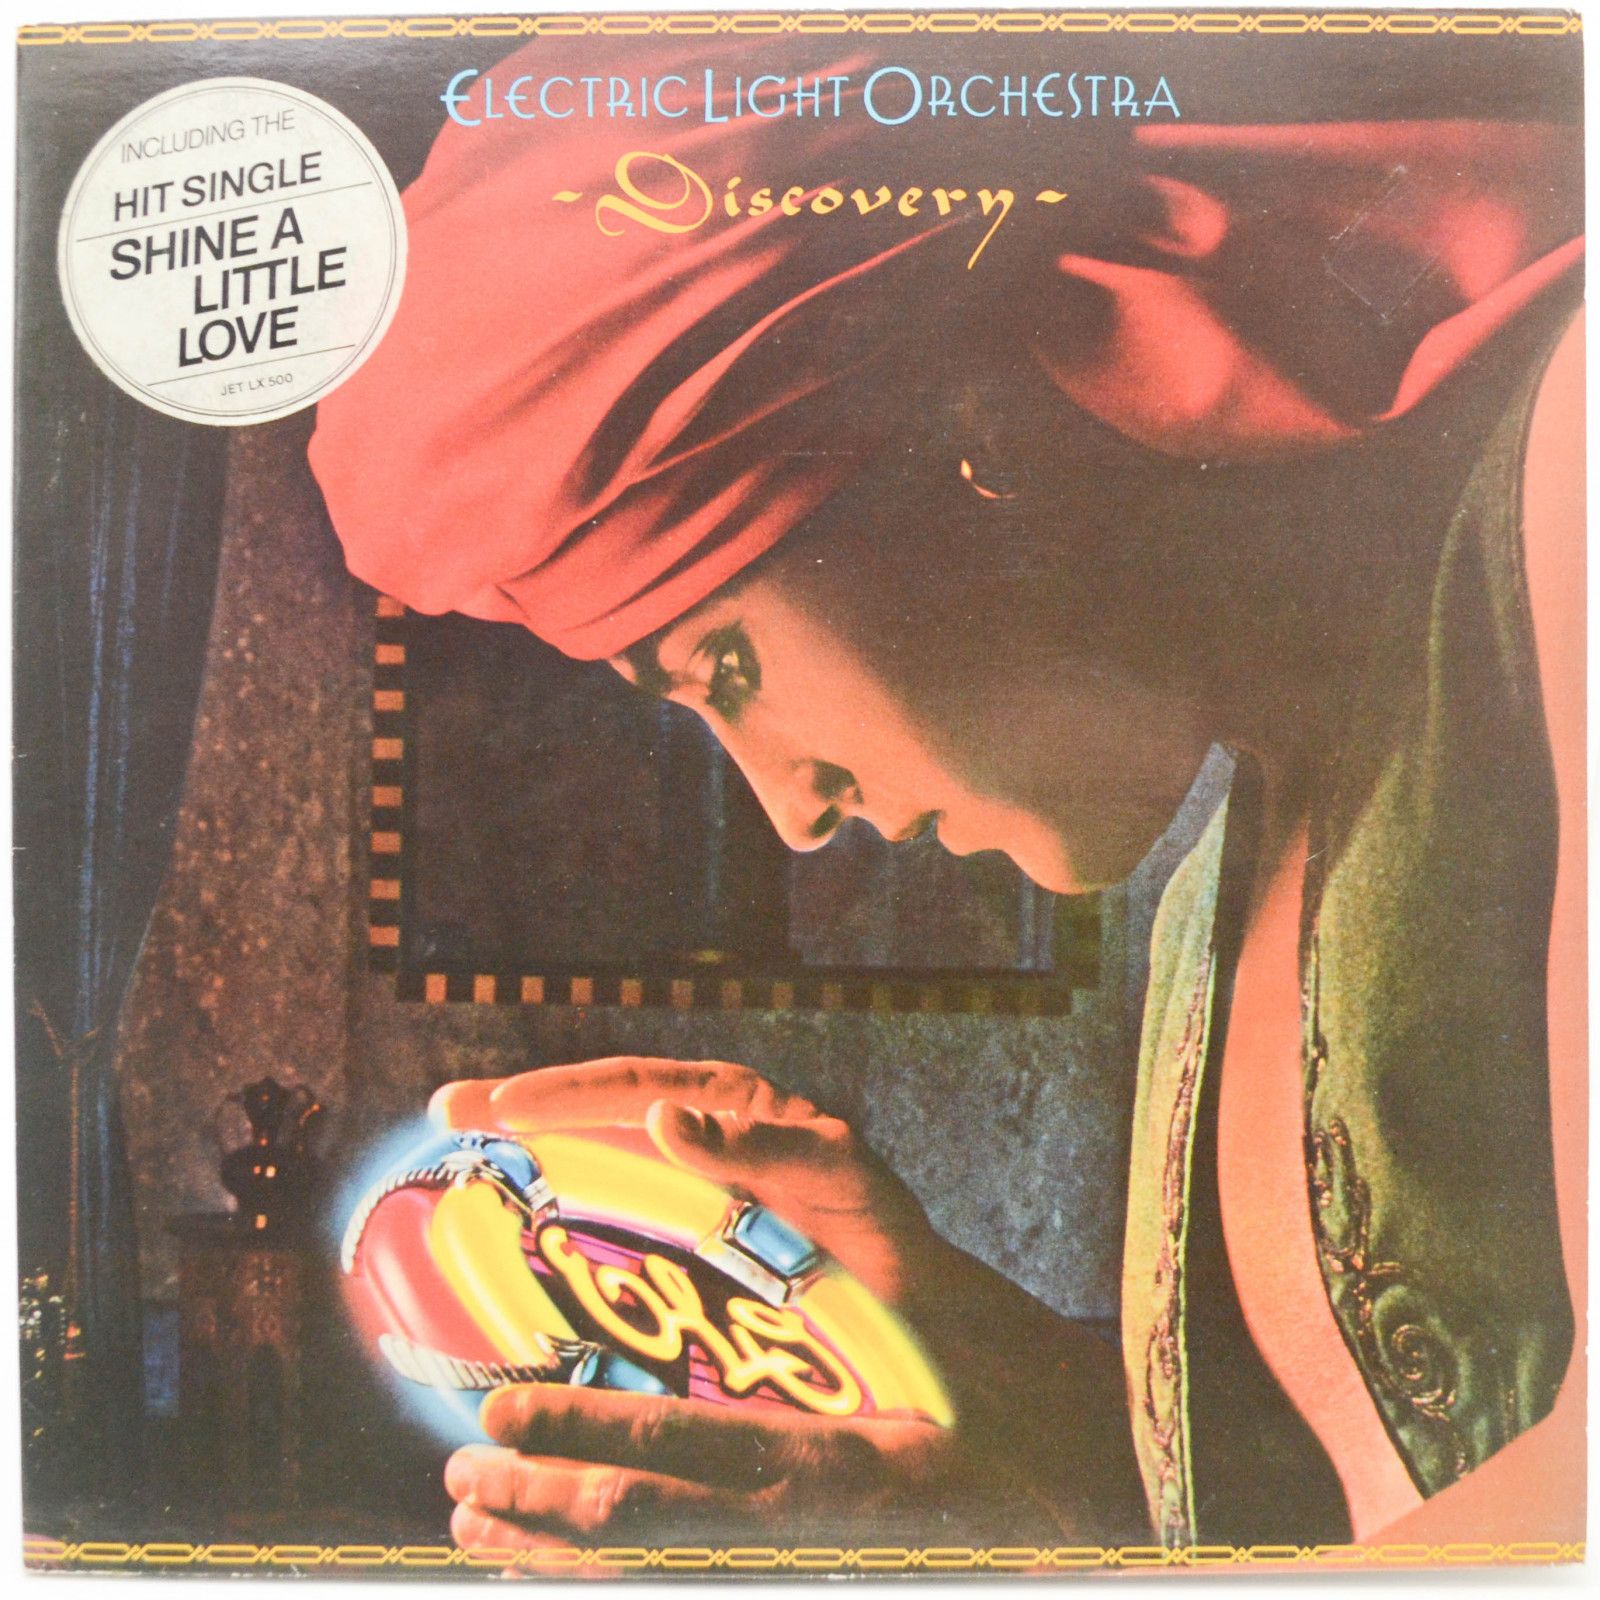 Electric Light Orchestra — Discovery, 1979